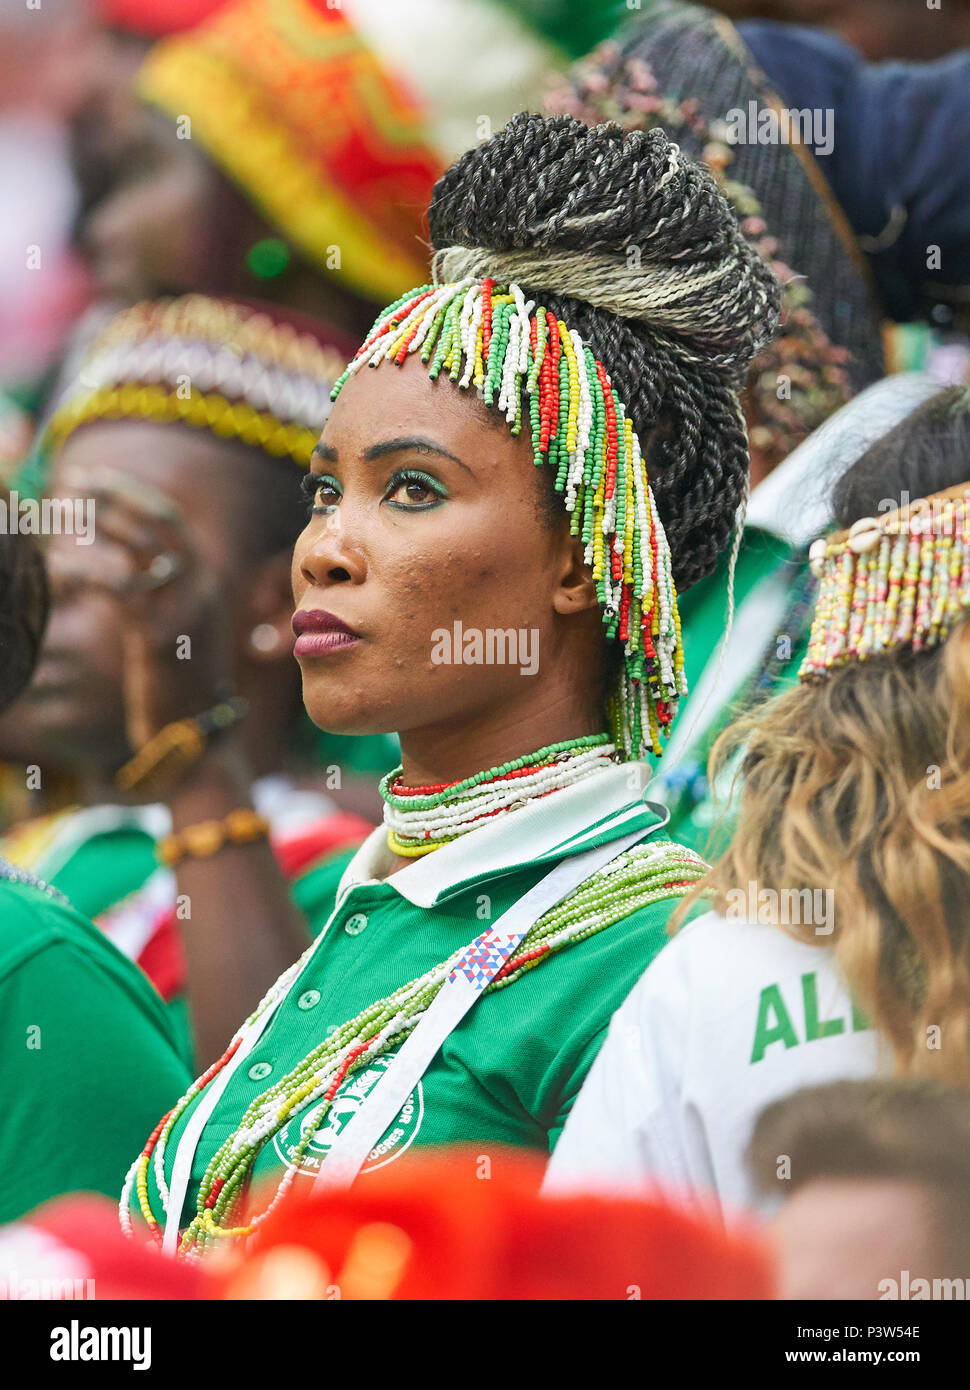 Moscow, Russia. 19th Jun, 2018. Poland- Senegal, Soccer, Moscow, June 19, 2018 Senegalese woman in traditional dress, fans, supporters, spectators, club flags,  celebration.  POLAND - SENEGAL 1-2 Football FIFA WORLD CUP 2018 RUSSIA, Season 2018/2019,  June 19, 2018 S p a r t a k Stadium in Moscow, Russia.  © Peter Schatz / Alamy Live News Stock Photo